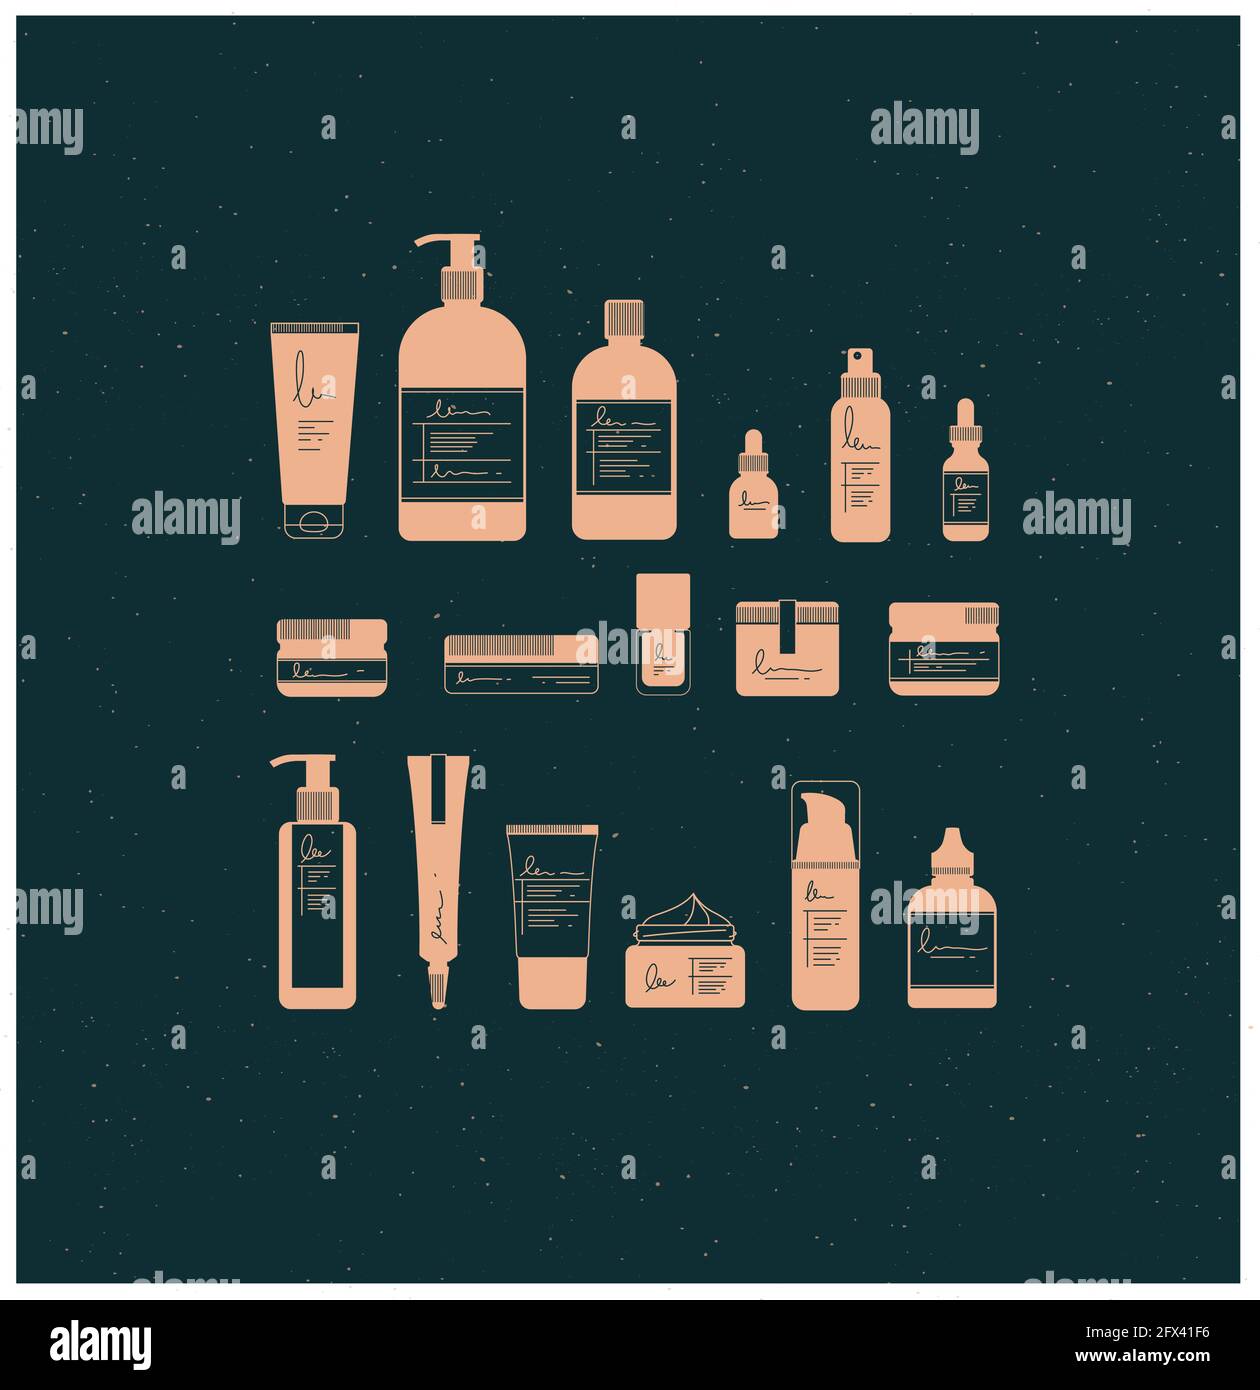 Set of cosmetic bottles in graphic style. Many containers for beauty and fashion products drawing on dark background Stock Vector